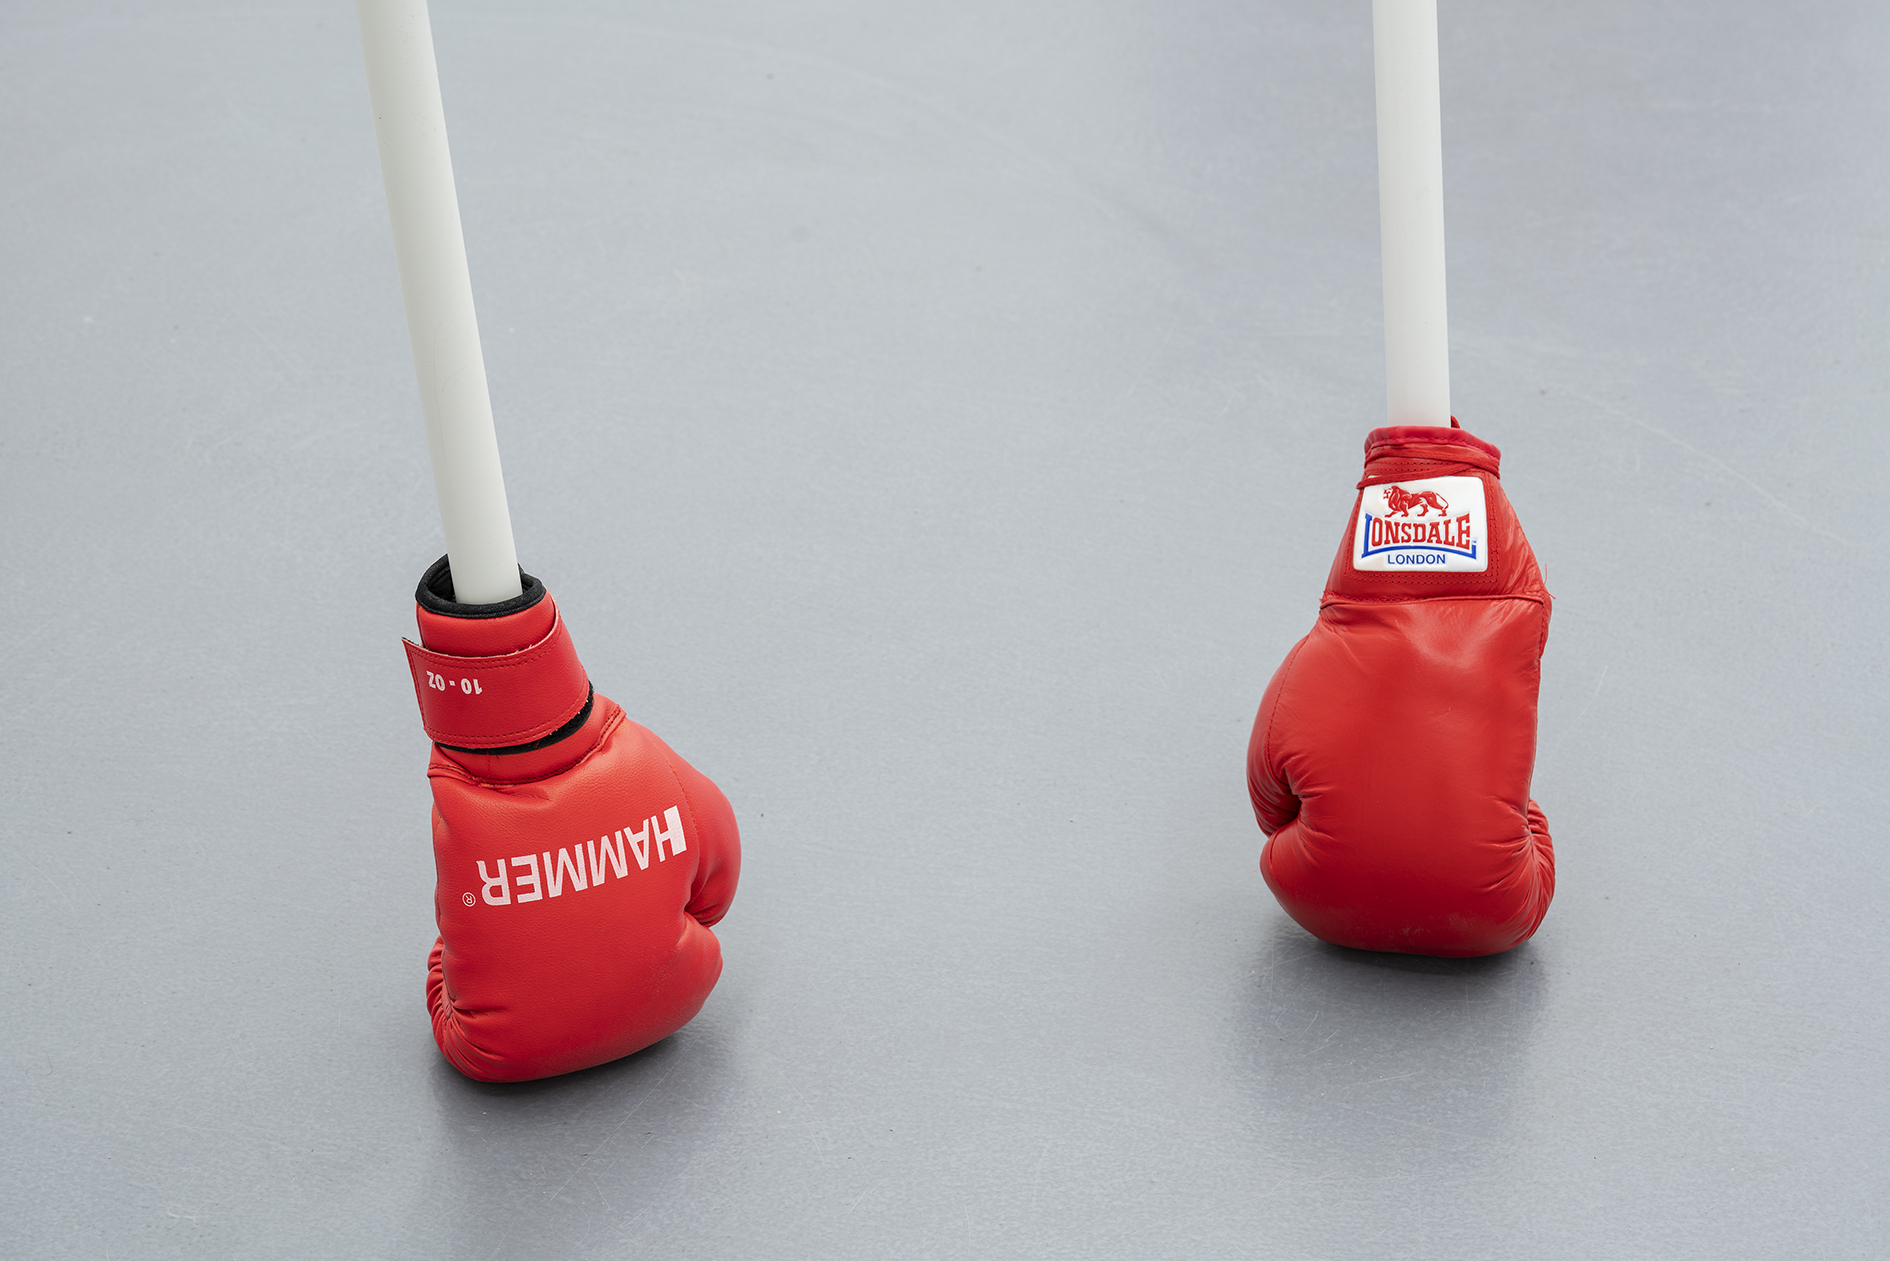 Katja Aufleger, The Argument, 2020 – 3 pairs of boxing gloves, plastic tu- bes, dimensions variable. Courtesy the artist and Galerie Conradi, Hamburg.